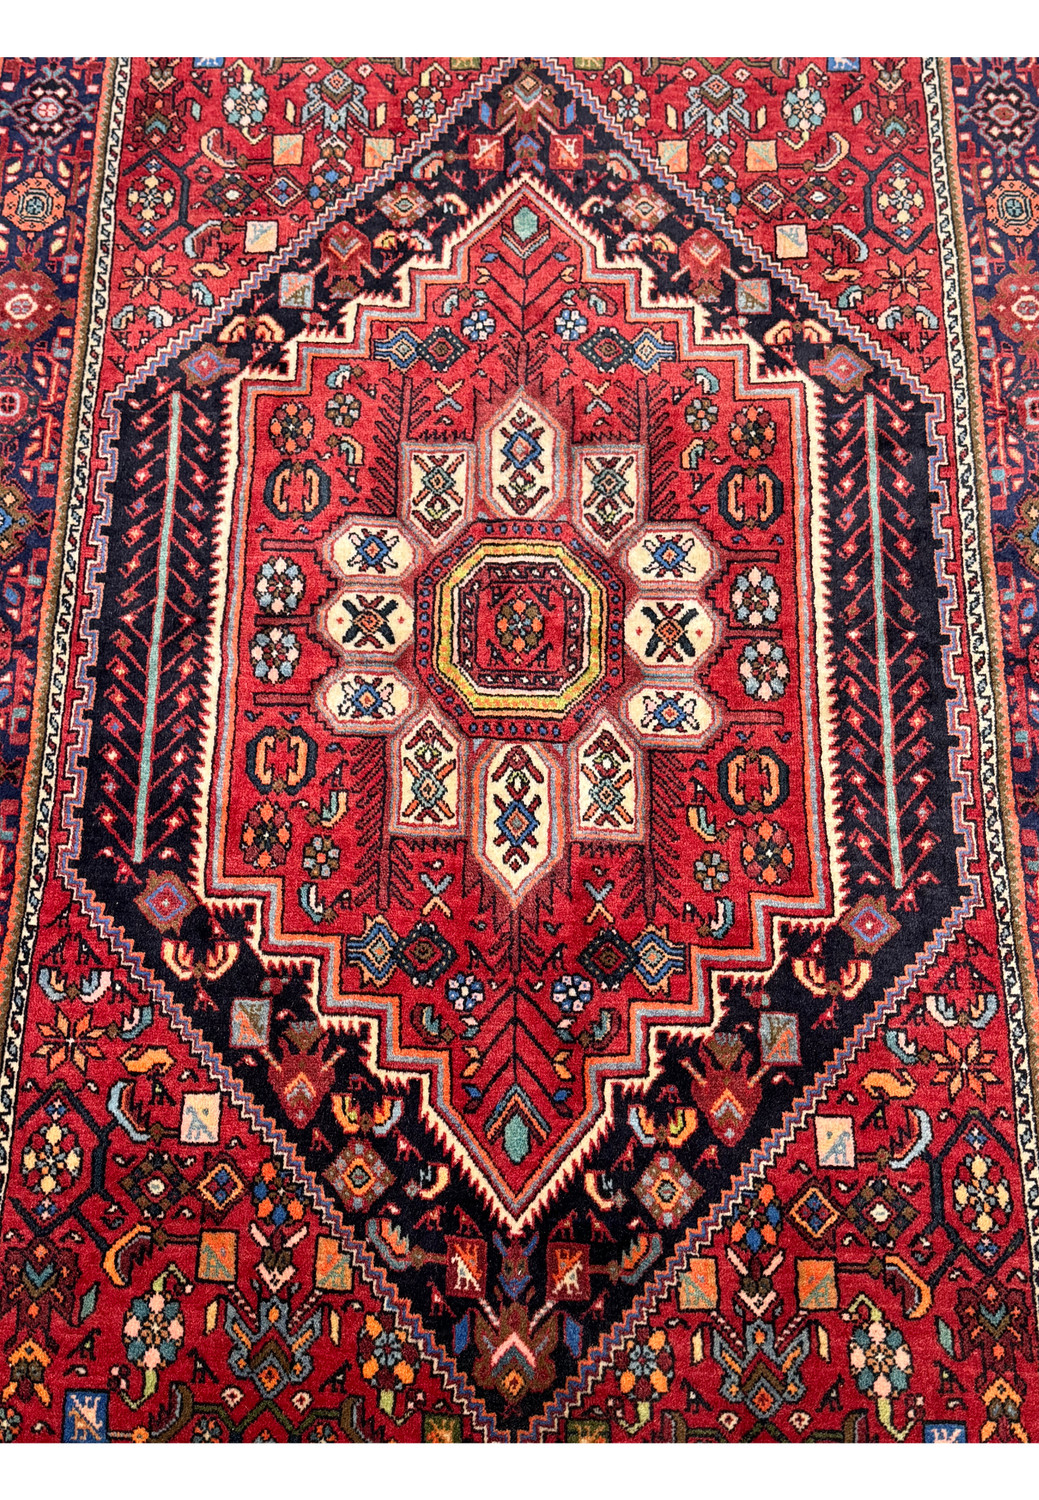 Close-up on the full display of a Persian Gholotgh Rug, highlighting the detailed craftsmanship and rich color scheme with dominant red hues